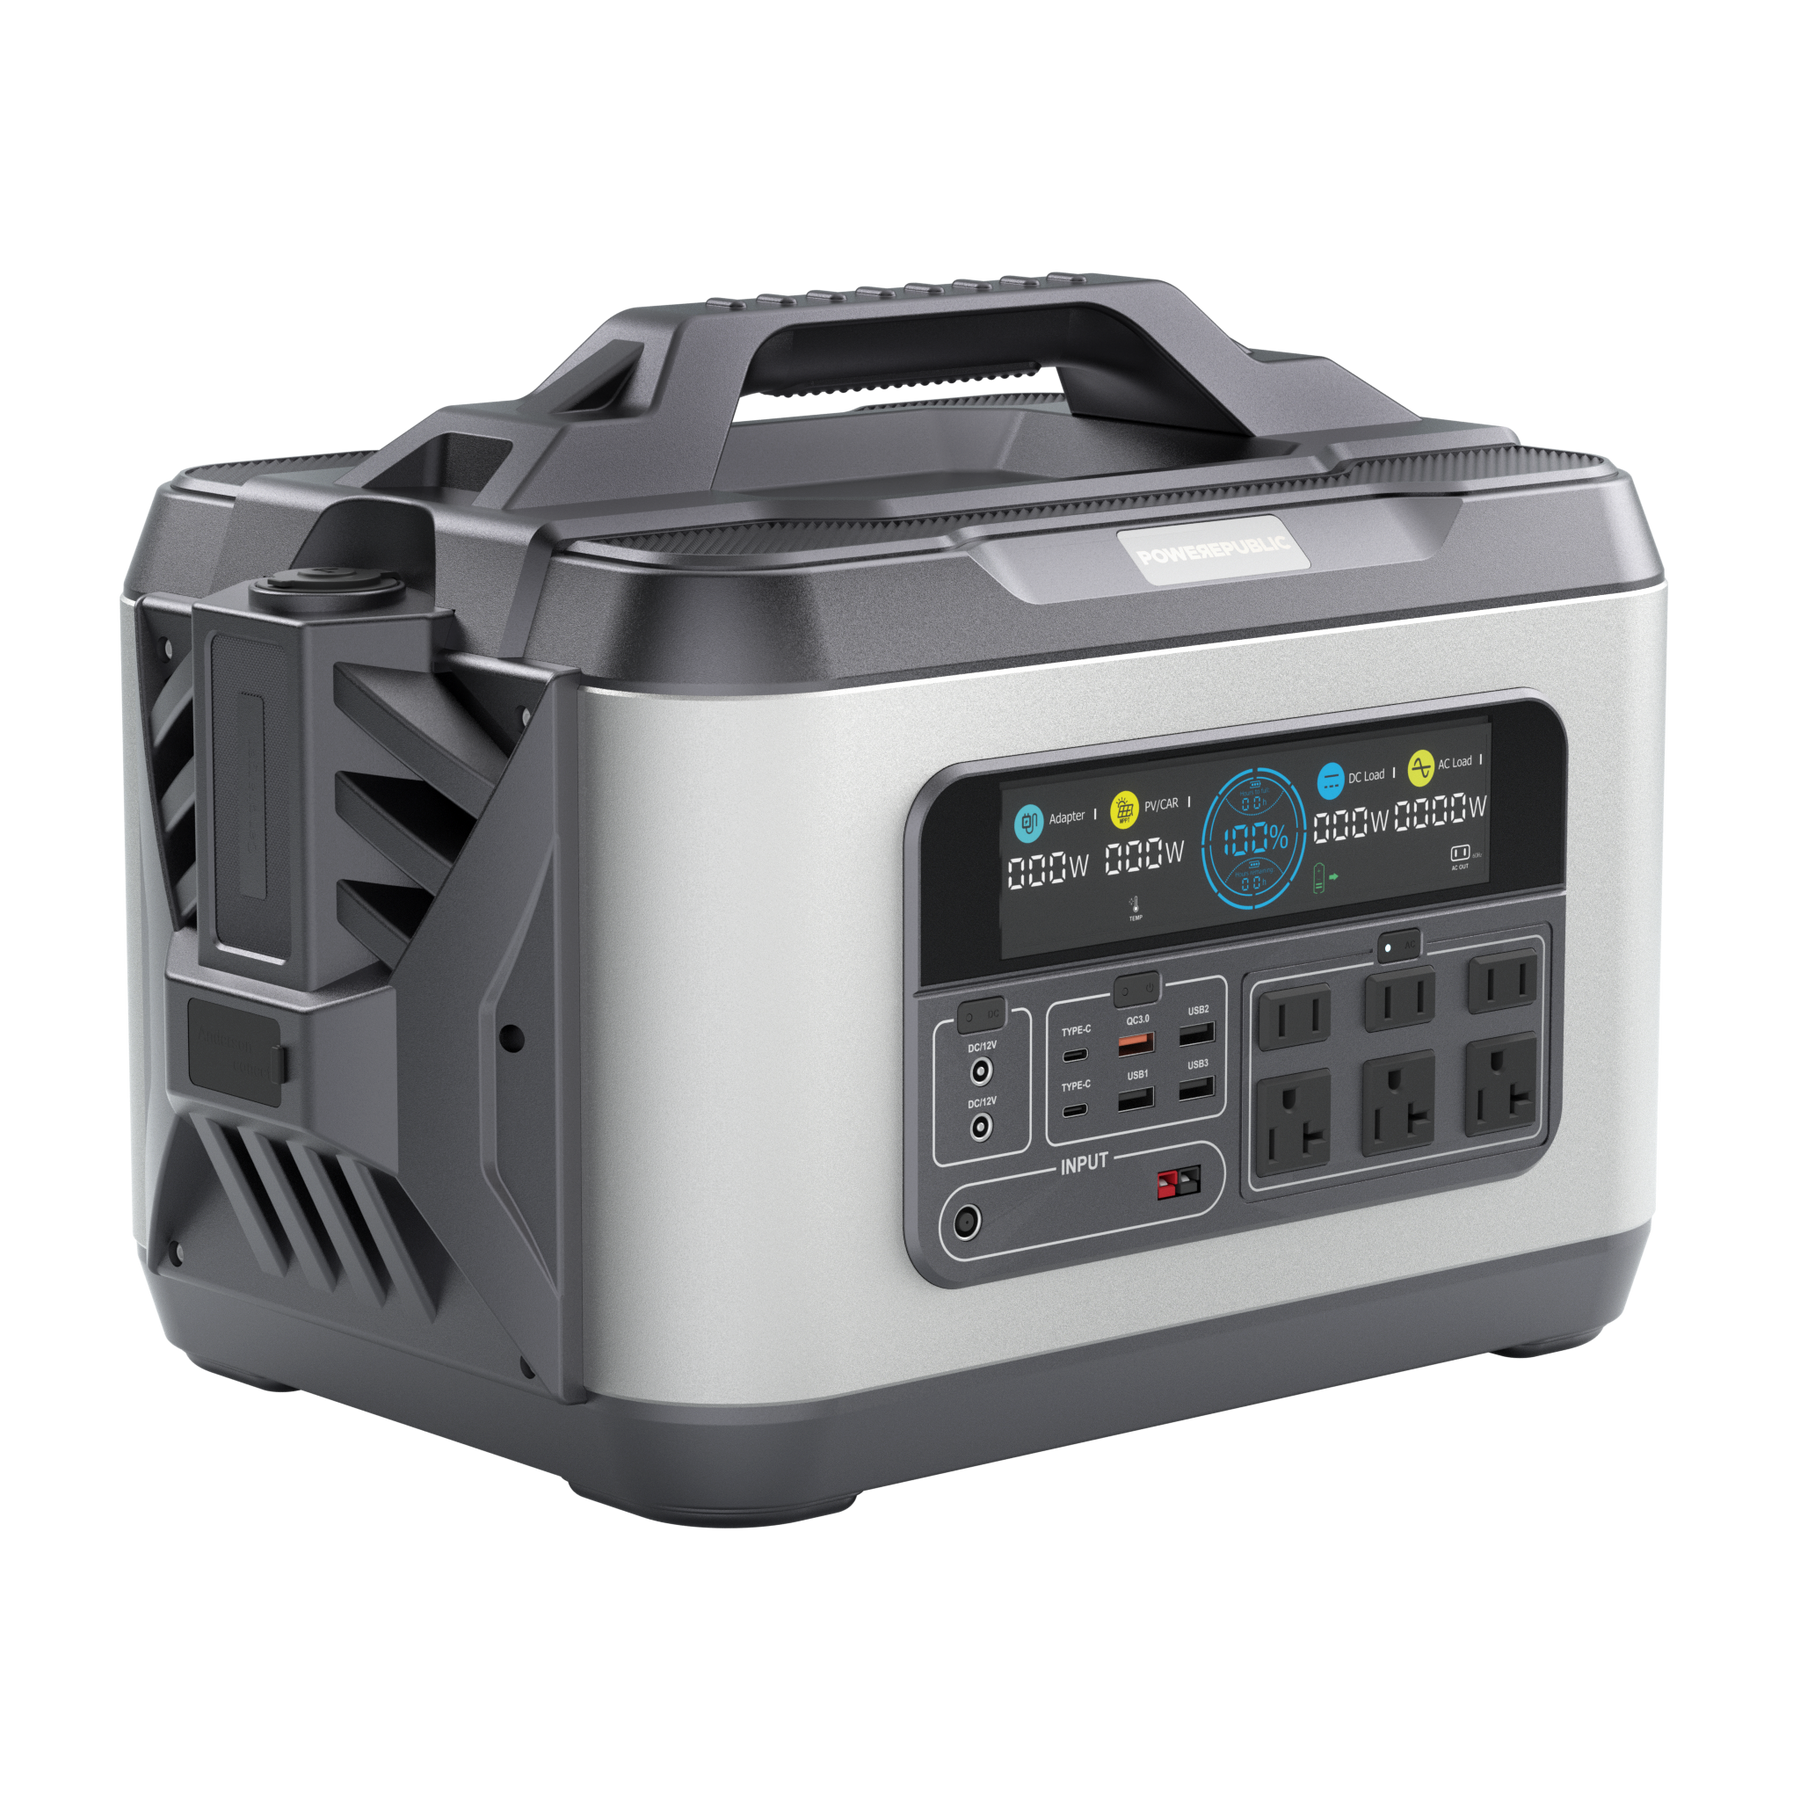 POWEREPUBLIC T2200 portable power station, 2200W 2240Wh, metallic gray aluminum-alloy body with aircraft wing design, a handle, an LCD screen, and input and output ports.